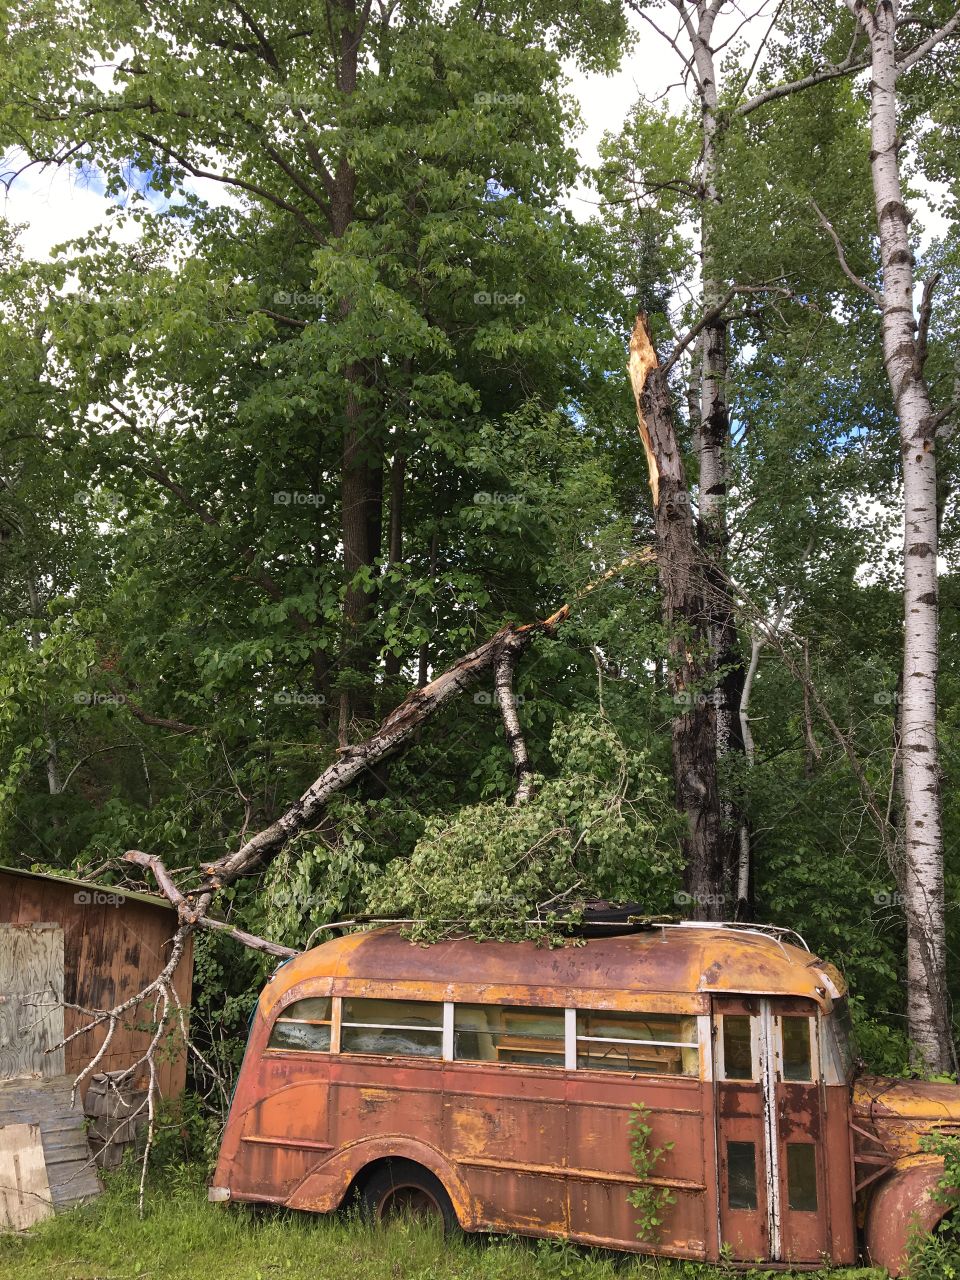 Not even a mighty tree will damage this old bus!